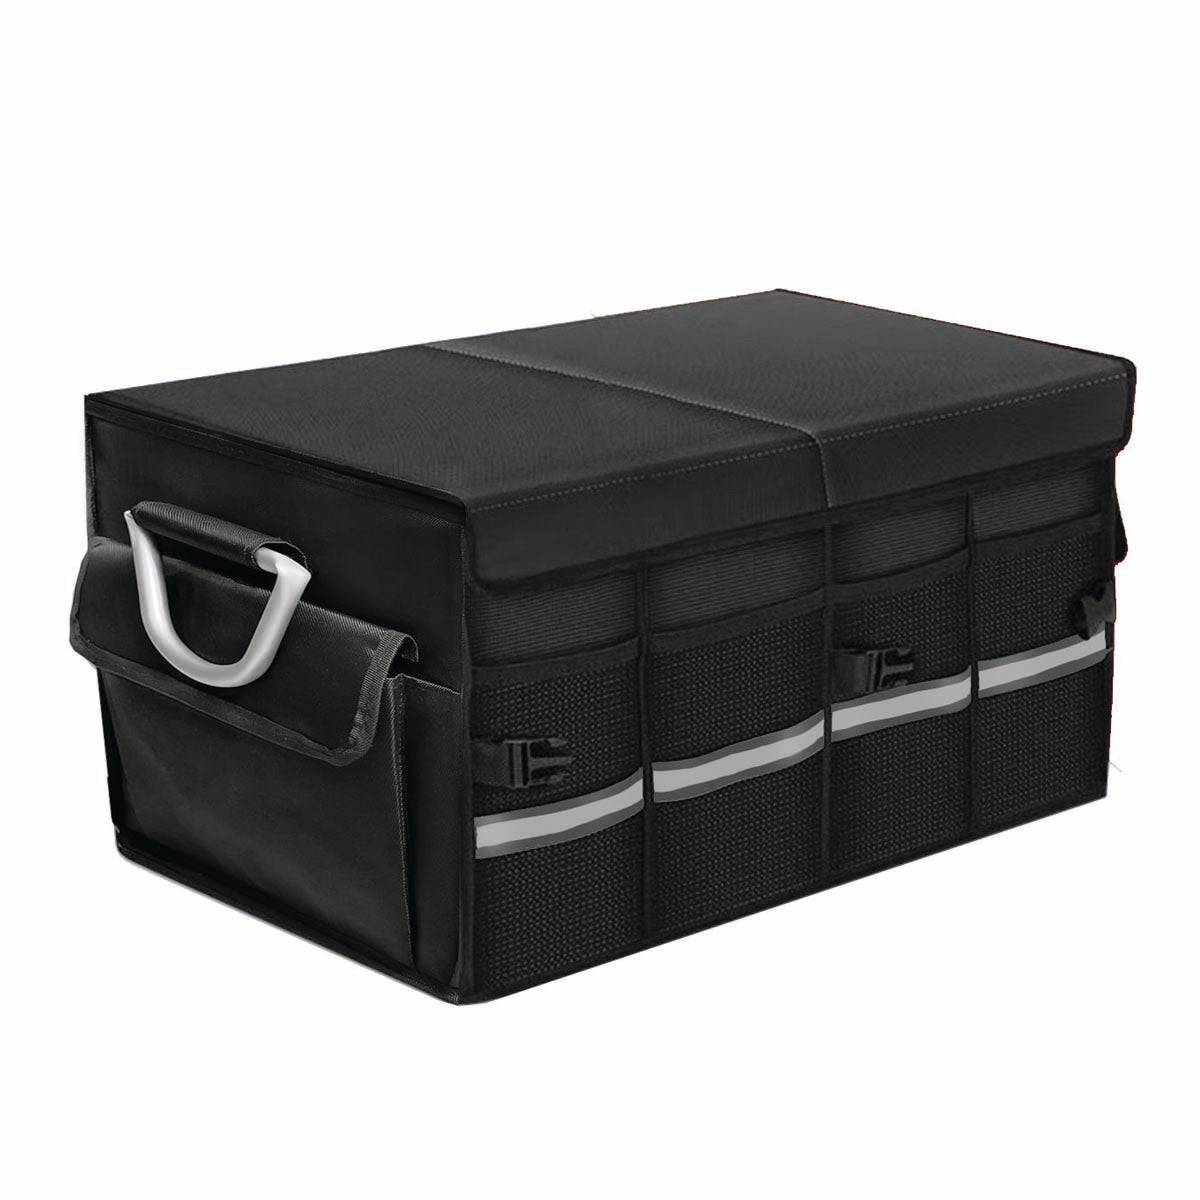 Big Trunk Organizer, Cargo Organizer SUV Trunk Storage Waterproof Collapsible Durable Multi Compartments MS12994